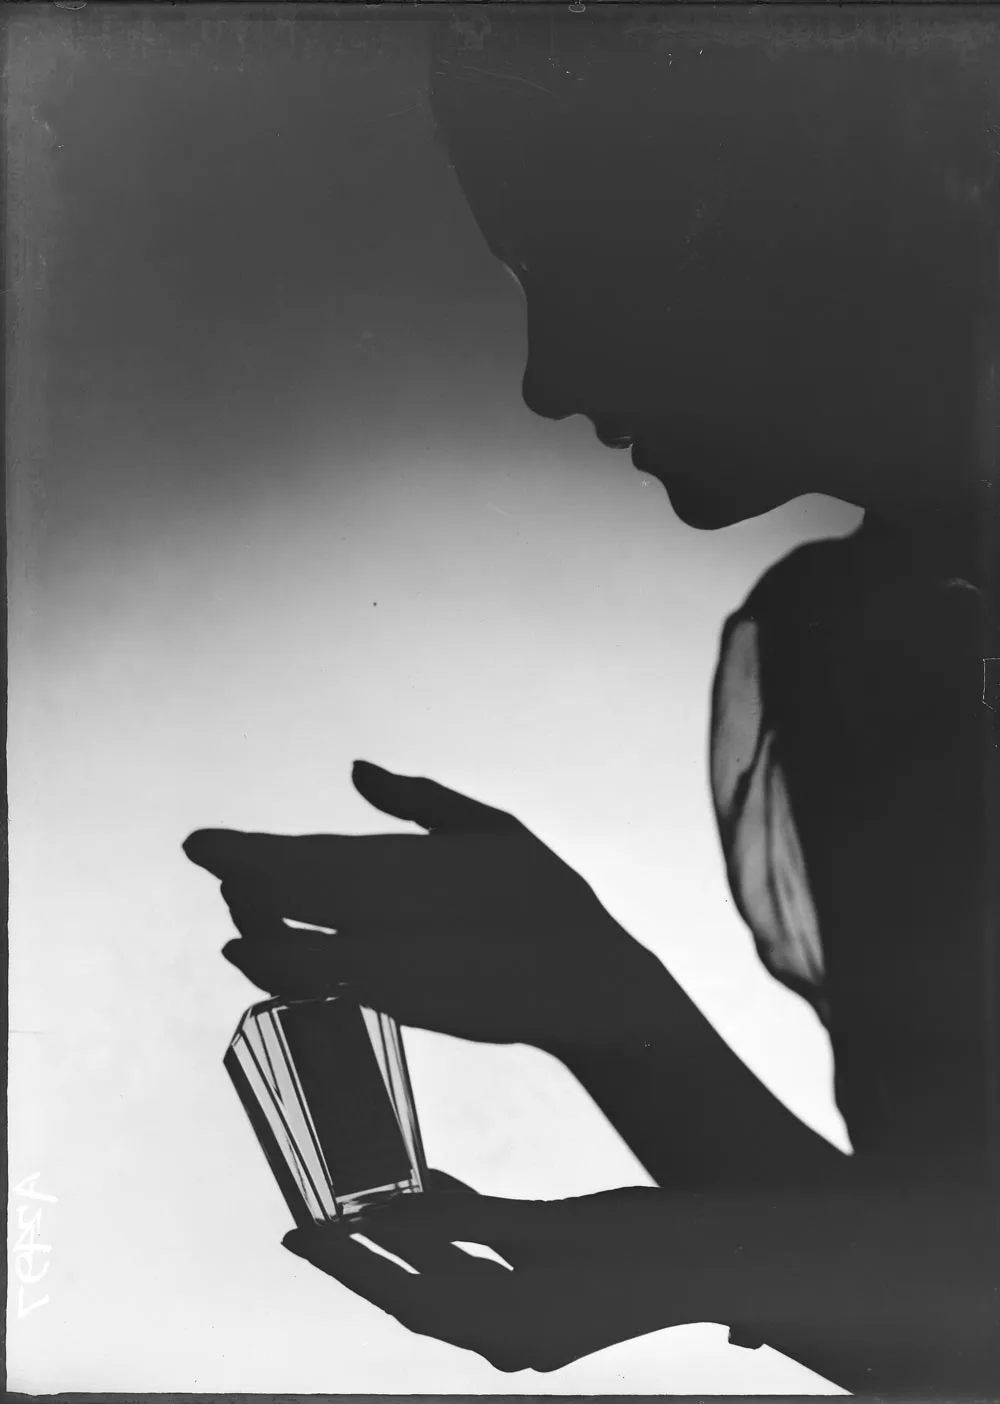 Showing a dark outline of a woman holding a cosmetic bottle, for Sargood Son and Ewen 1940